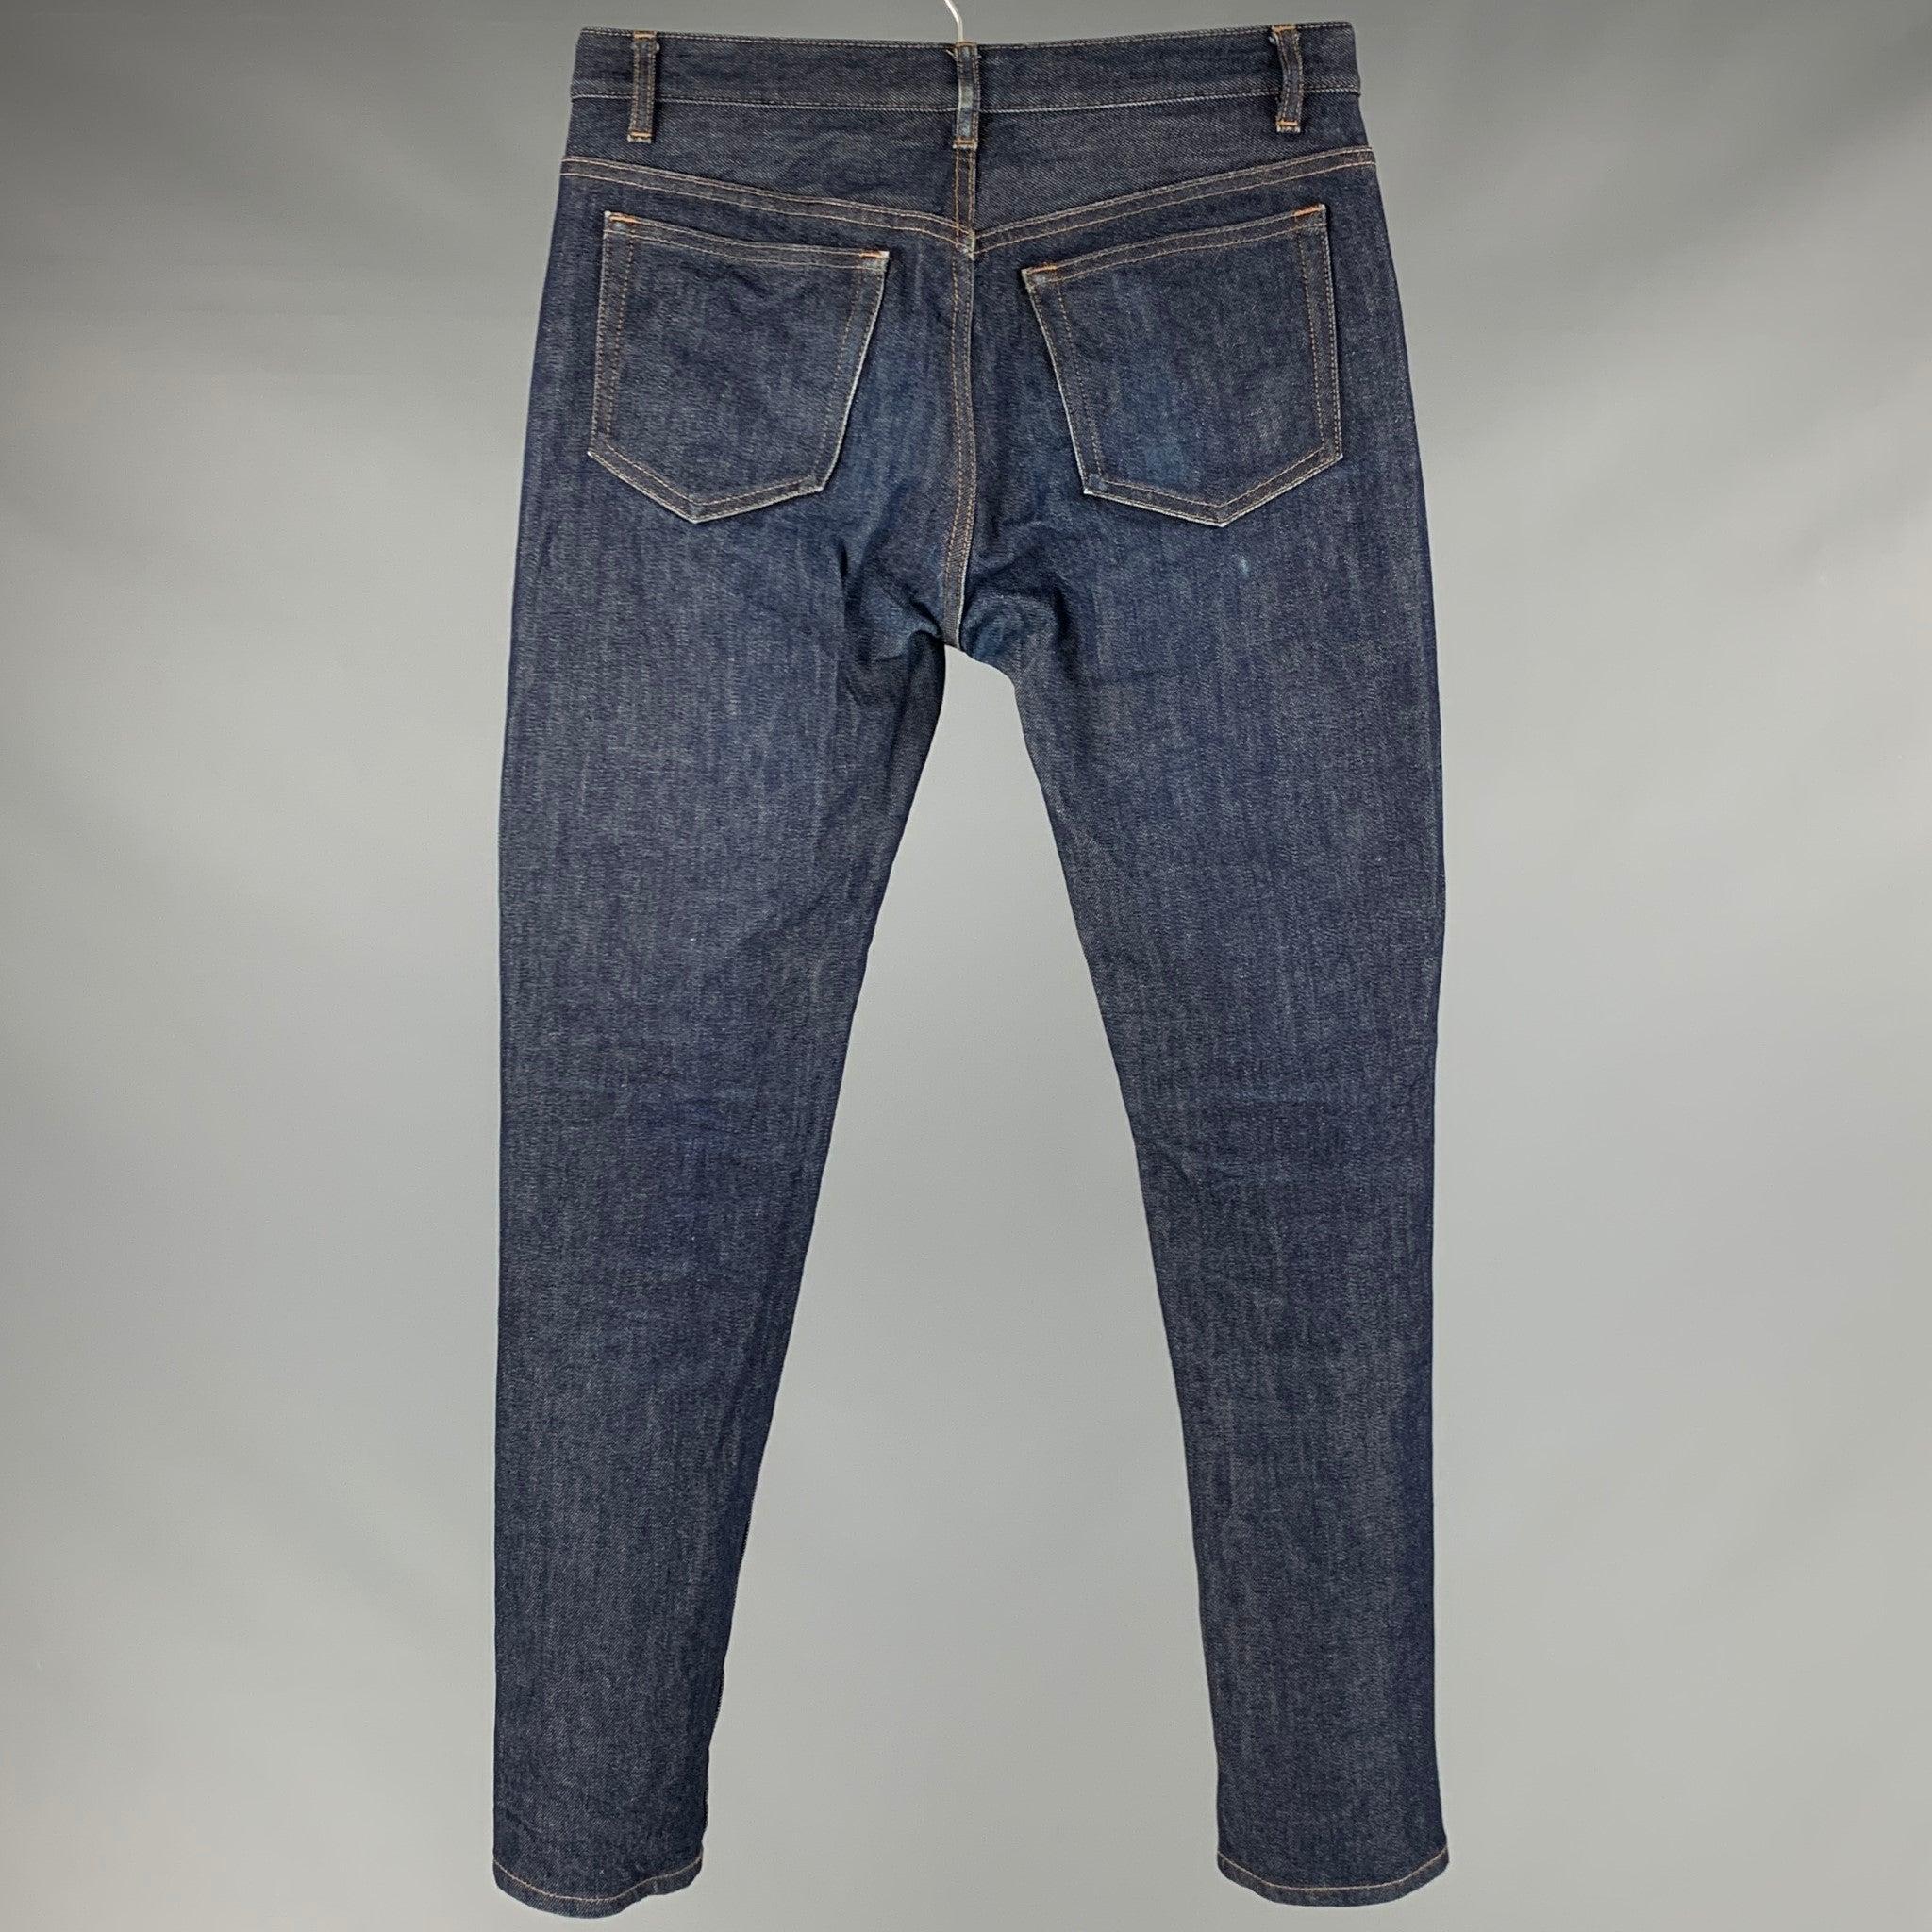 A.P.C. jeans
in a blue cotton blend fabric featuring contrast stitching, five pockets style, and a button fly closure.Very Good Pre-Owned Condition. Minor marks. 

Marked:   29 

Measurements: 
  Waist: 29 inches Rise: 8 inches Inseam: 29 inches 
 